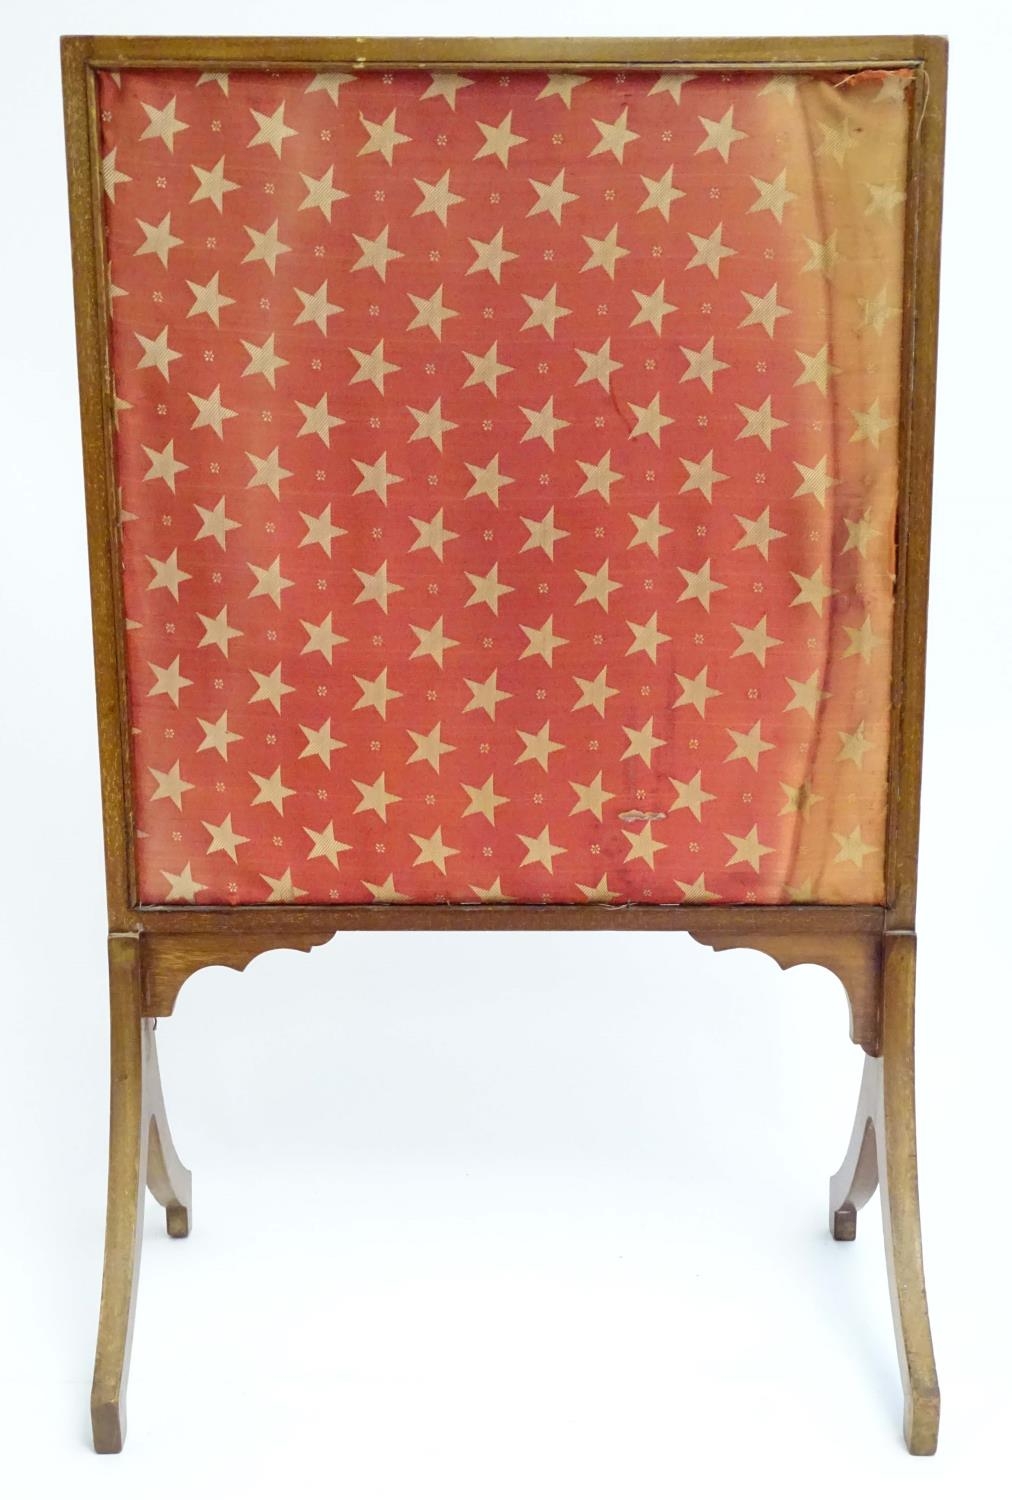 An early 19thC silk needlework with fine floral decoration, bows, swags and a woven basket in a - Image 7 of 10